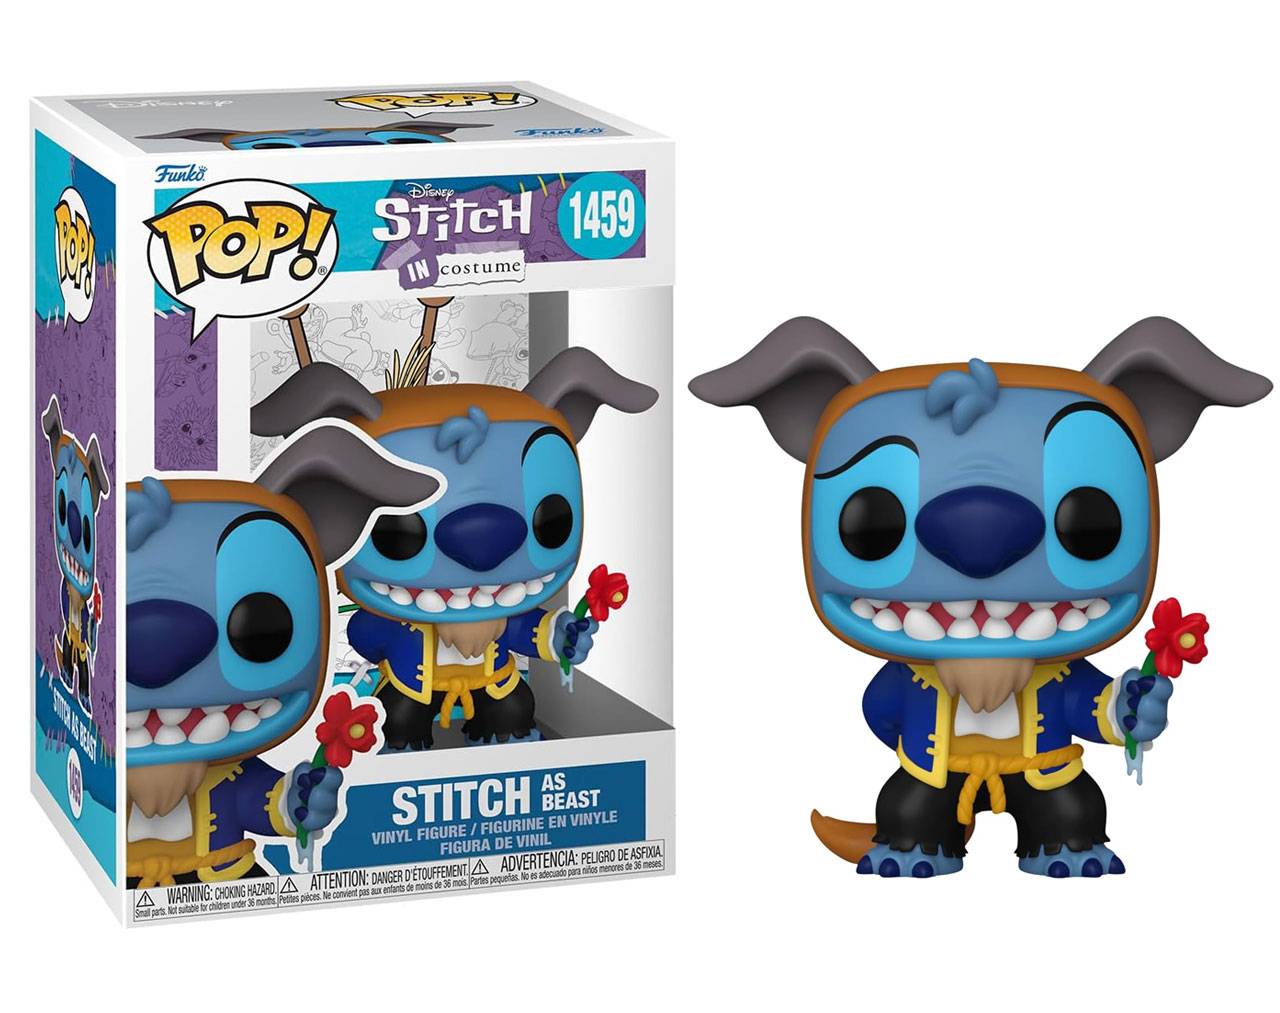 Stitch as Beast (The Beauty and the Beast) - Stitch in Costume Pop! Vinyl